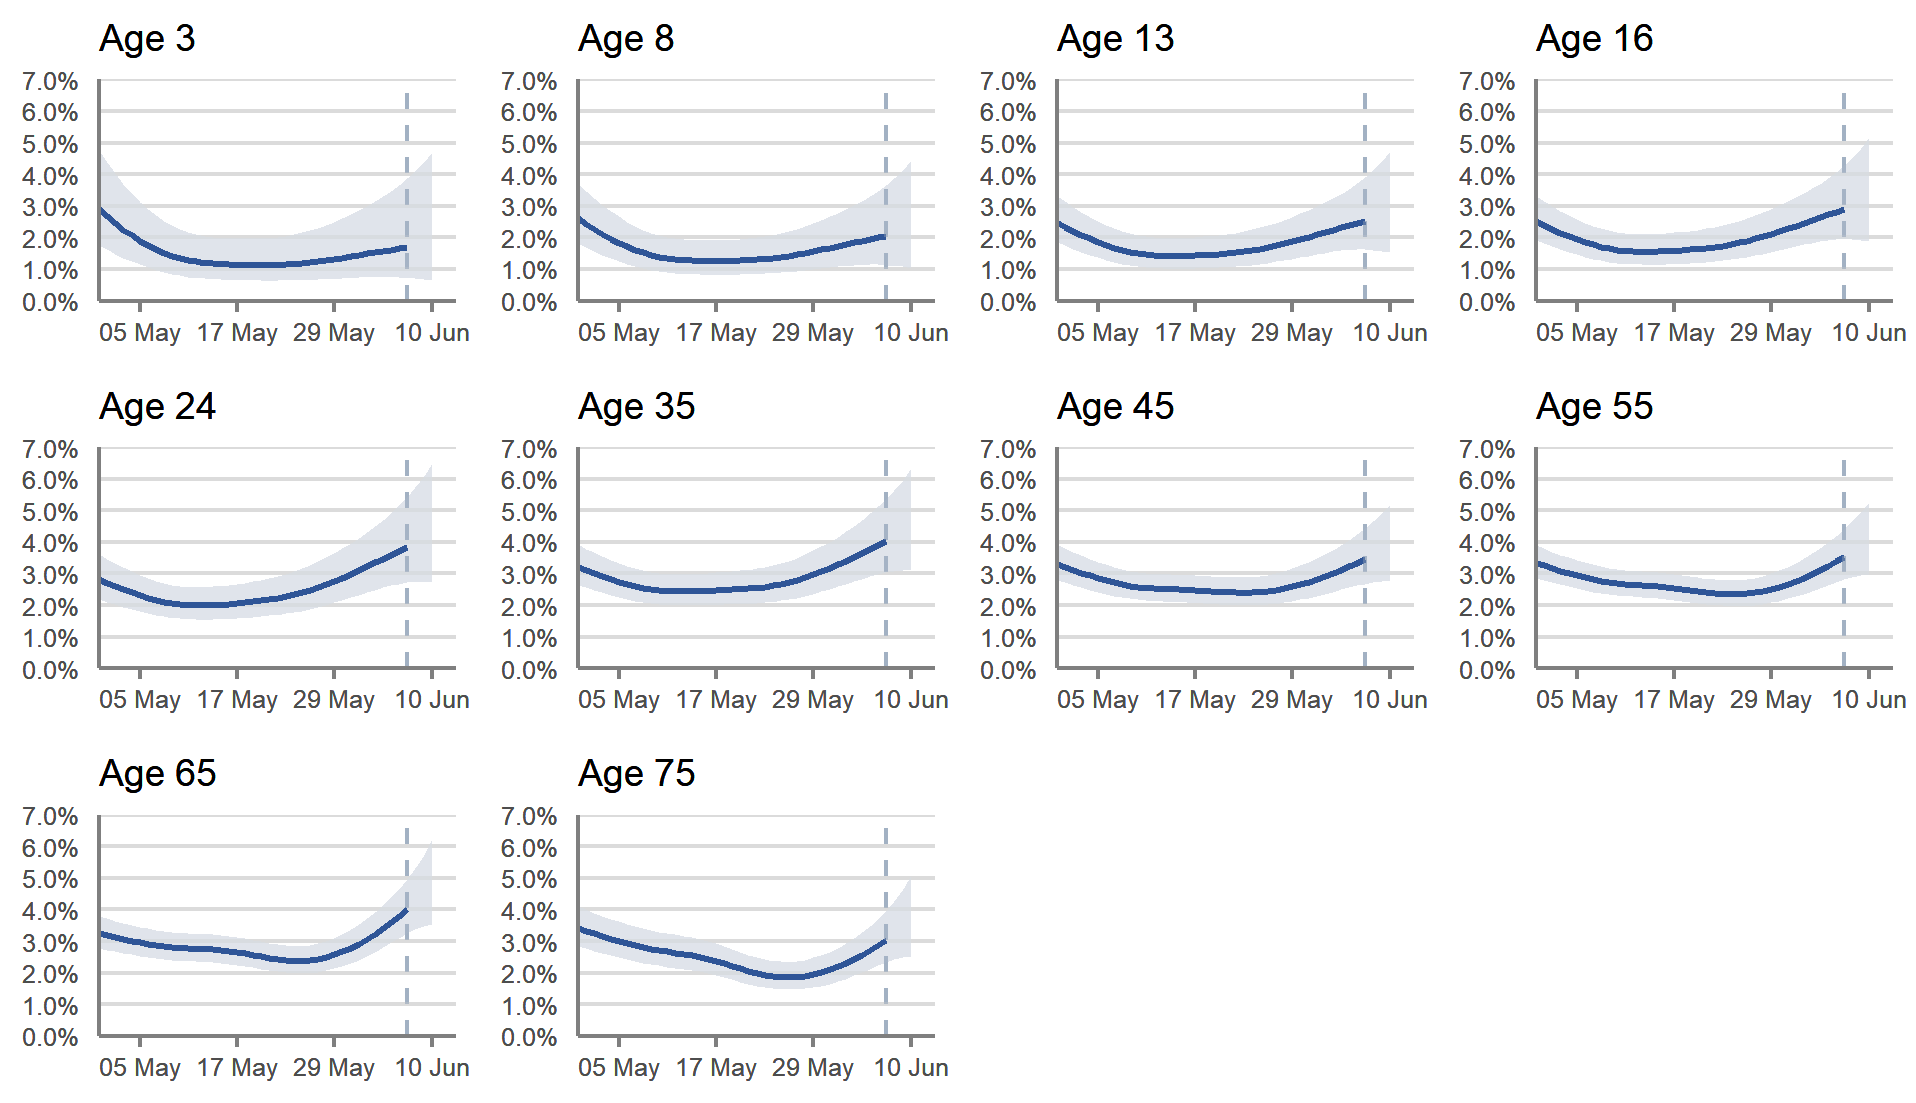 A set of ten line charts showing modelled daily estimates of the percentage of the population in Scotland testing positive for COVID-19 for those of age 3, 8, 13, 16, 24, 35, 45, 55, 65 and 75 years of age, between 30 April and 10 June 2022. Modelled daily estimates are represented by a blue line with 95% credible intervals in pale blue shading. A vertical dashed line near the end of the series indicating greater uncertainty in estimates for the last three reported days. In Scotland, the estimated percentage of people testing positive for COVID-19 has increased for most age groups in recent week, but the trend is uncertain for those under age seven.